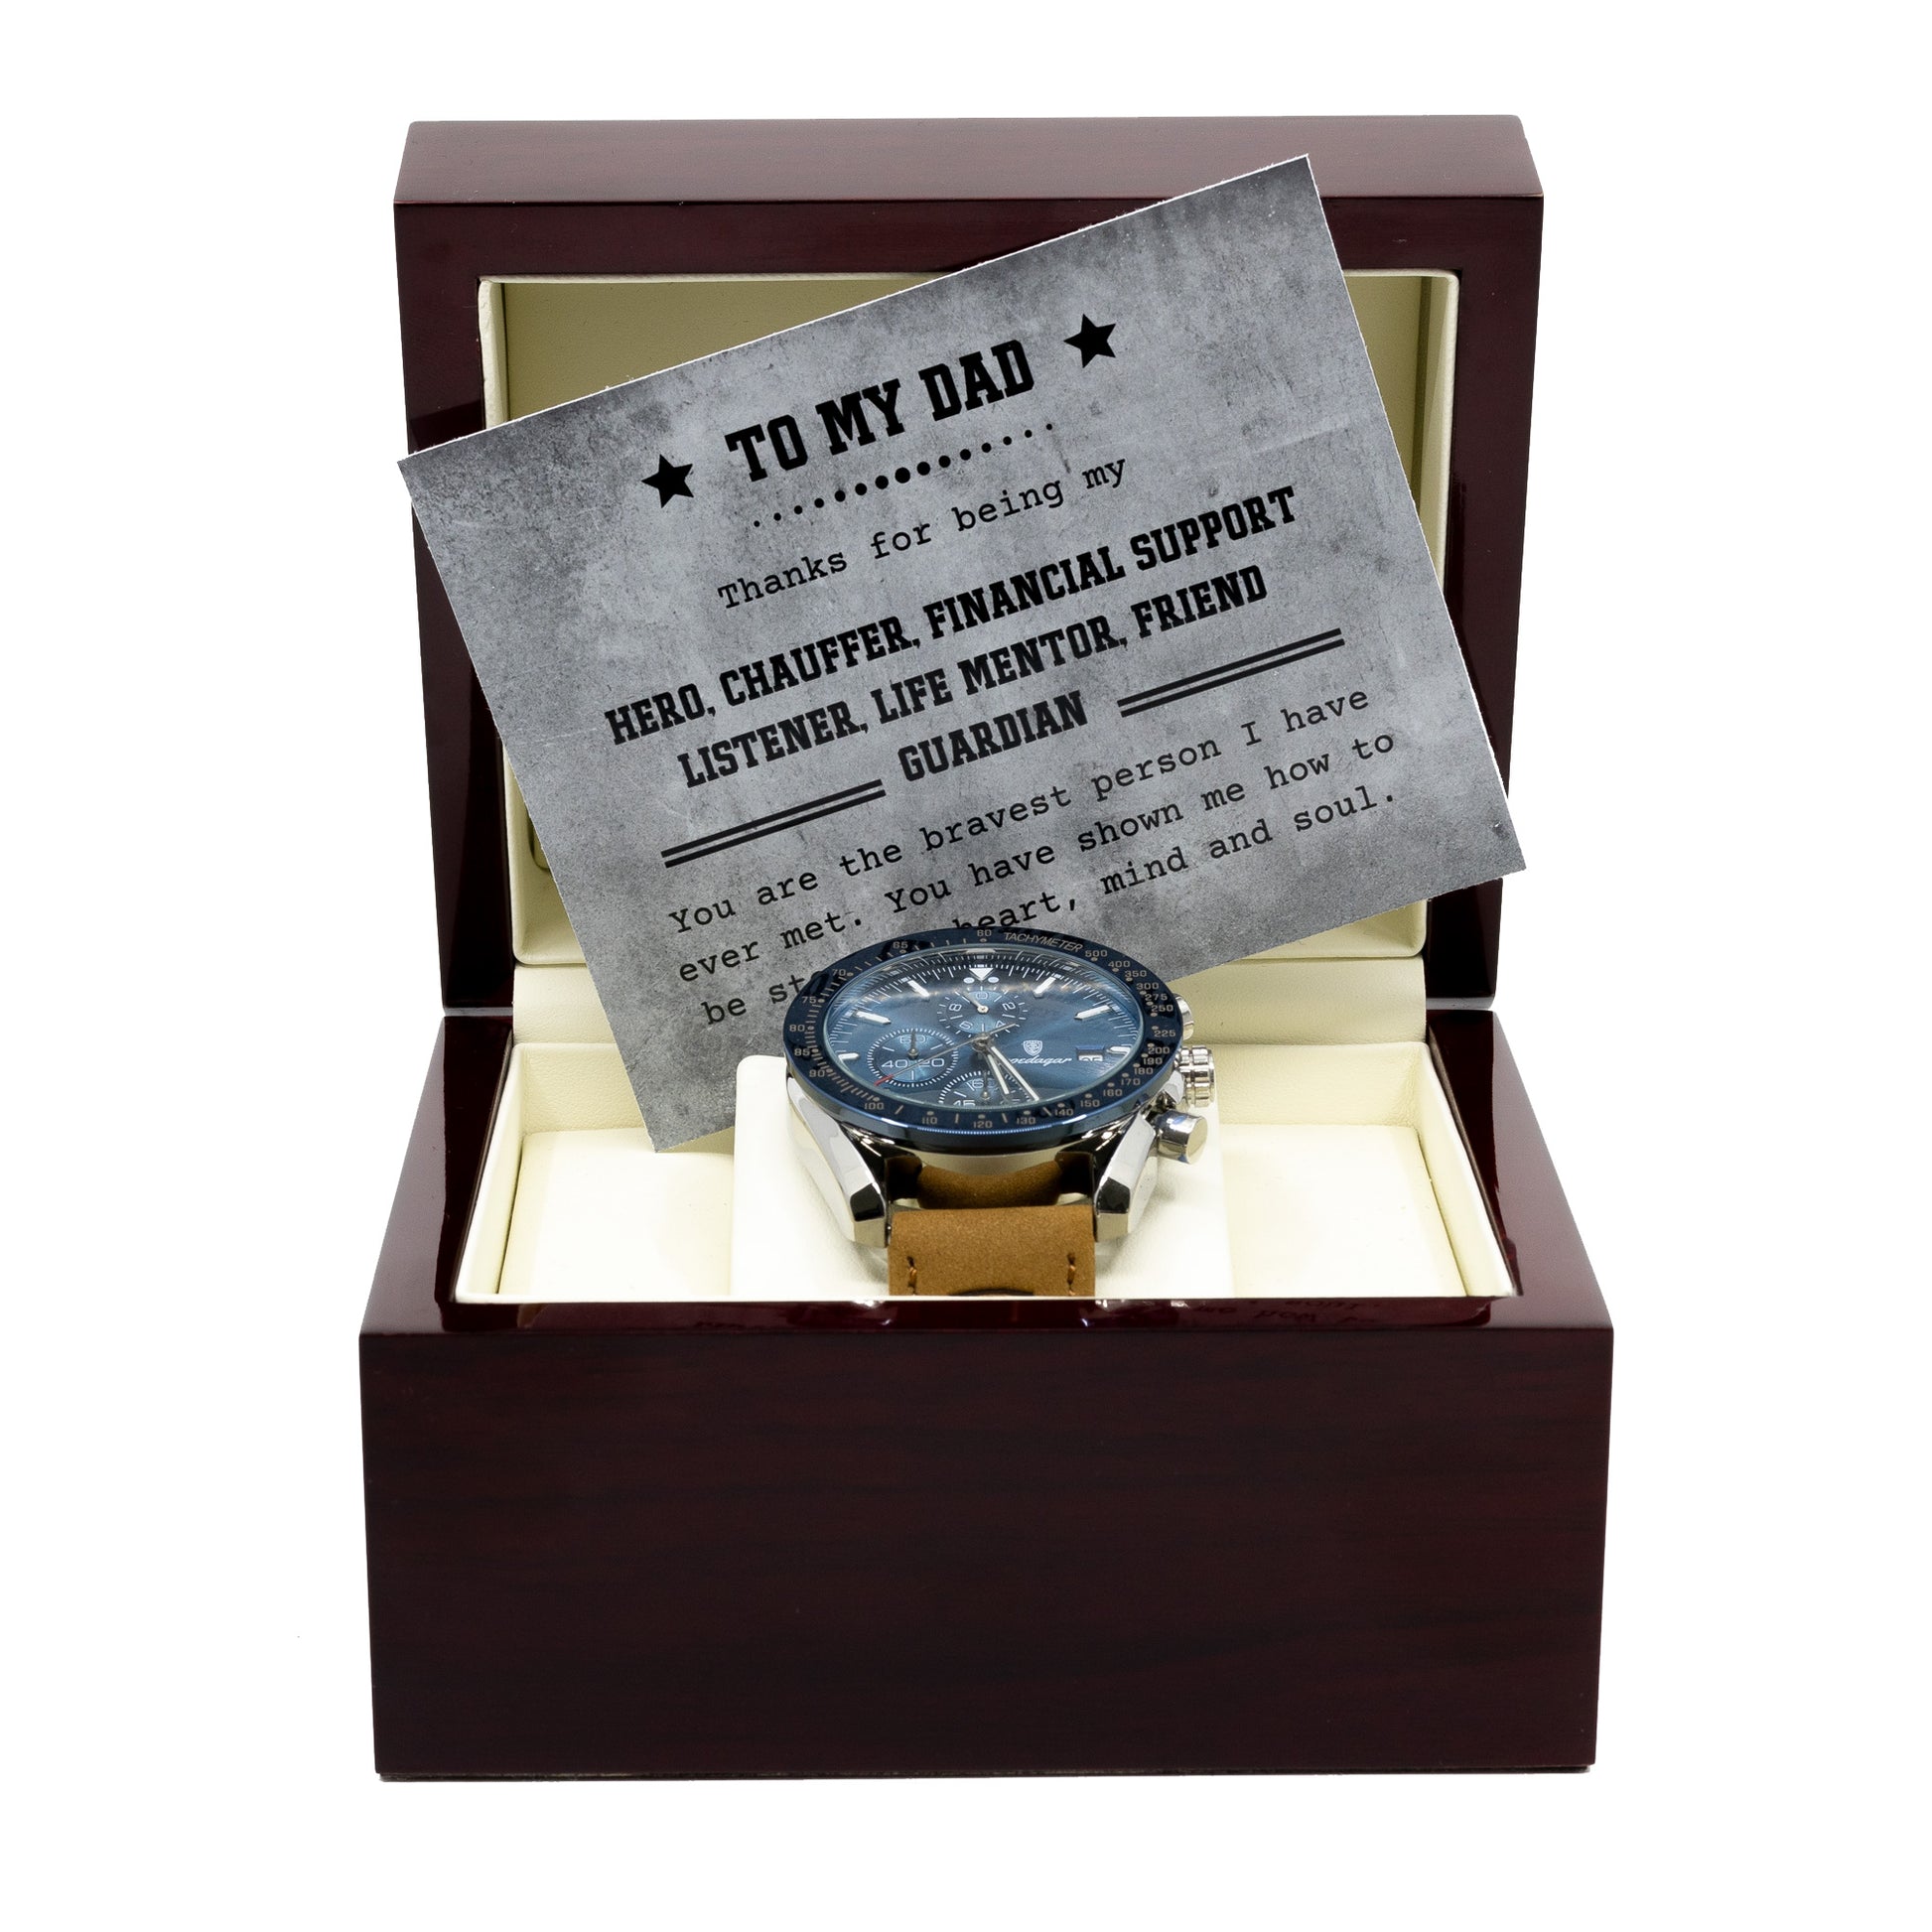 To My Dad - Luxury Watch Gift Set With Custom Message Card In Mahogany Box - Gift For Dad - Gift From Son - Gift From Daughter - Fathers Day